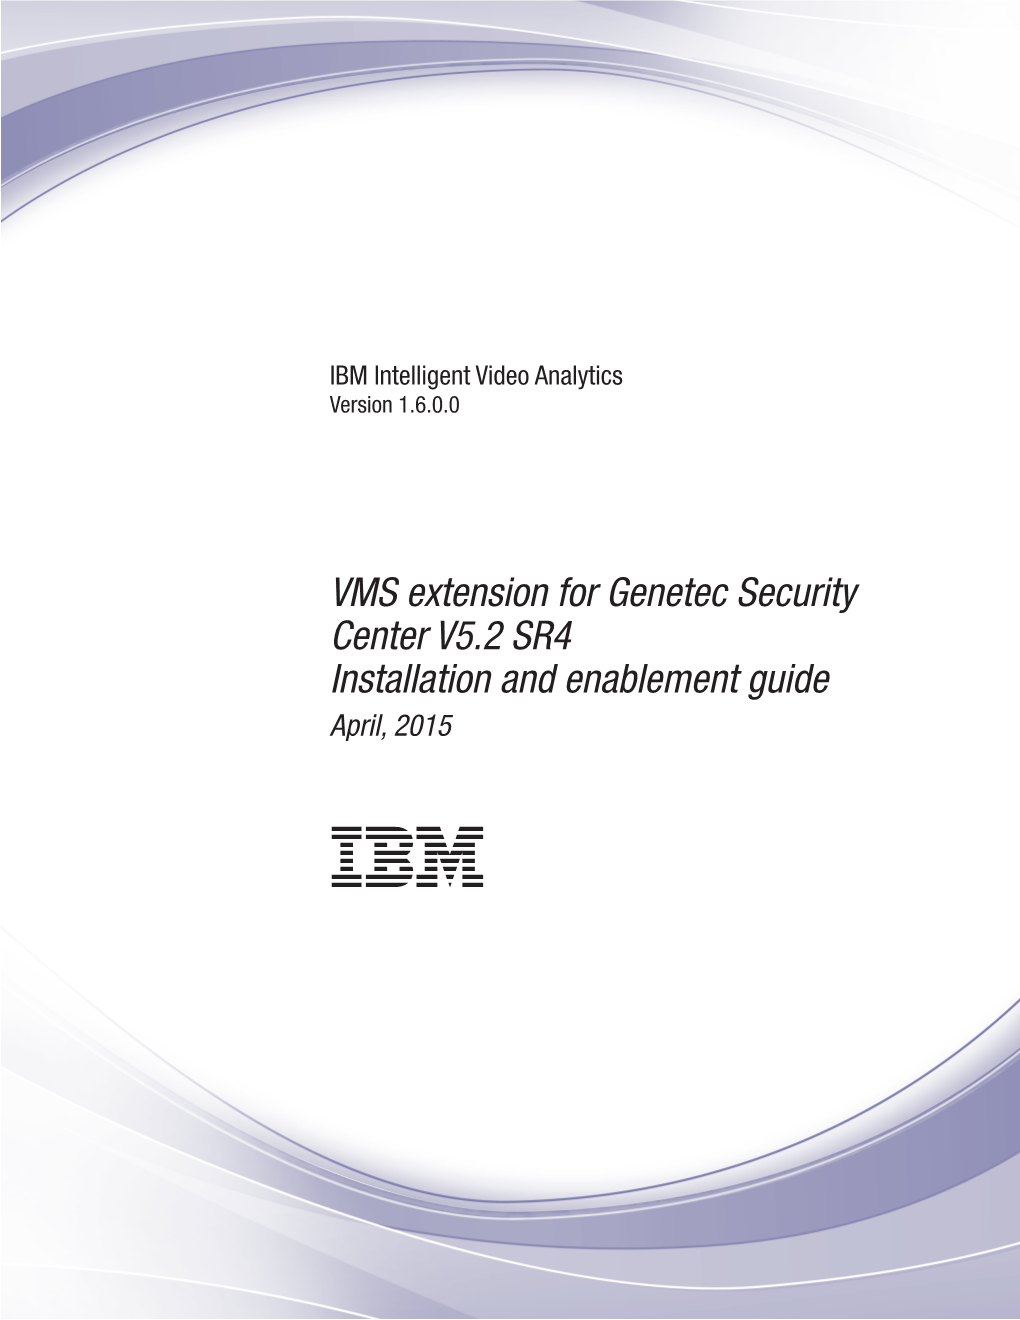 IBM Intelligent Video Analytics: VMS Extension for Genetec Security Center V5.2 SR4 Installation and Enablement Guide April, 2015 Chapter 1